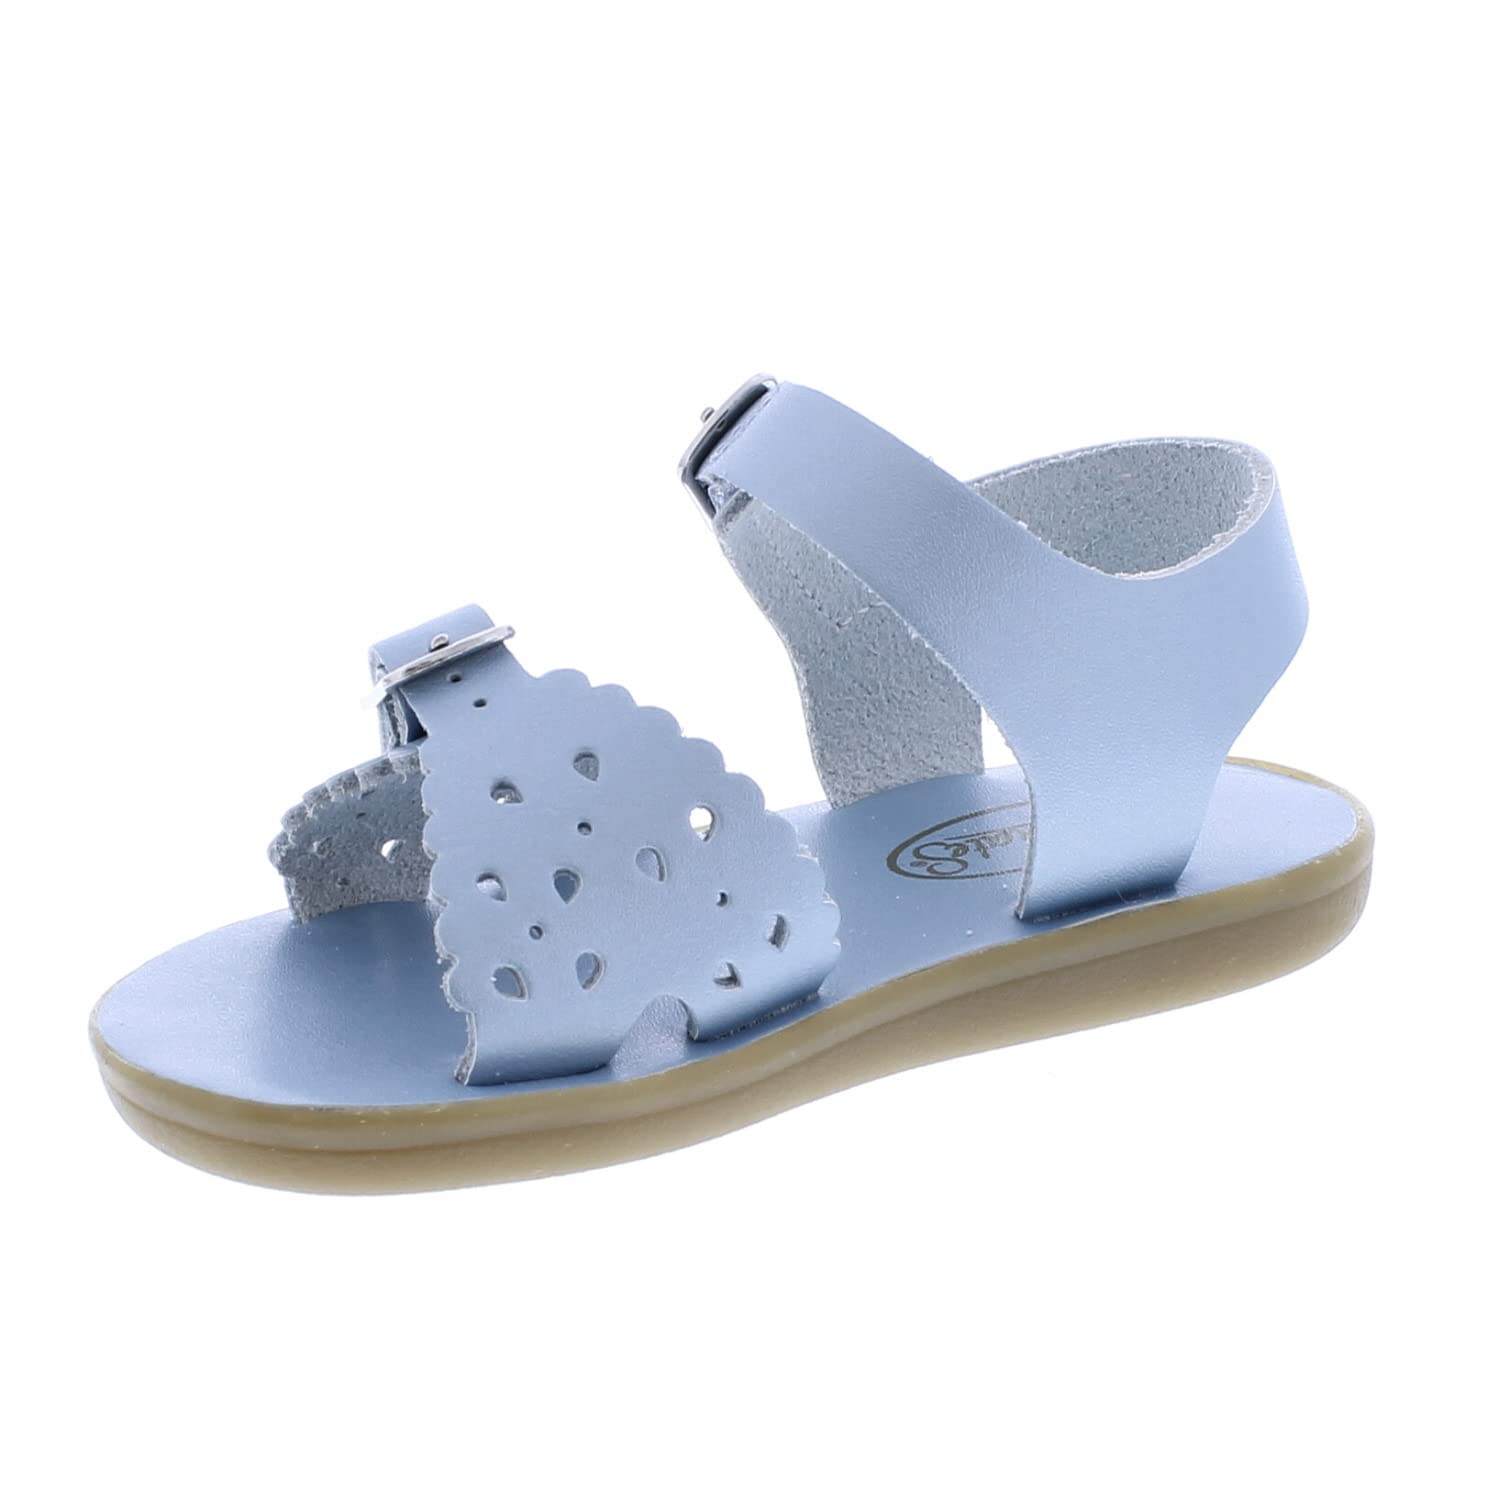 FOOTMATES Ariel and Eco-Ariel Waterproof Sandals for Girls and Boys - Microfiber Vegan Nappa with Slip-Resistant Non-Marking Outsoles and Strap-Closure, Blue Pearl Micro - 12 Little Kid (4-8 Years)